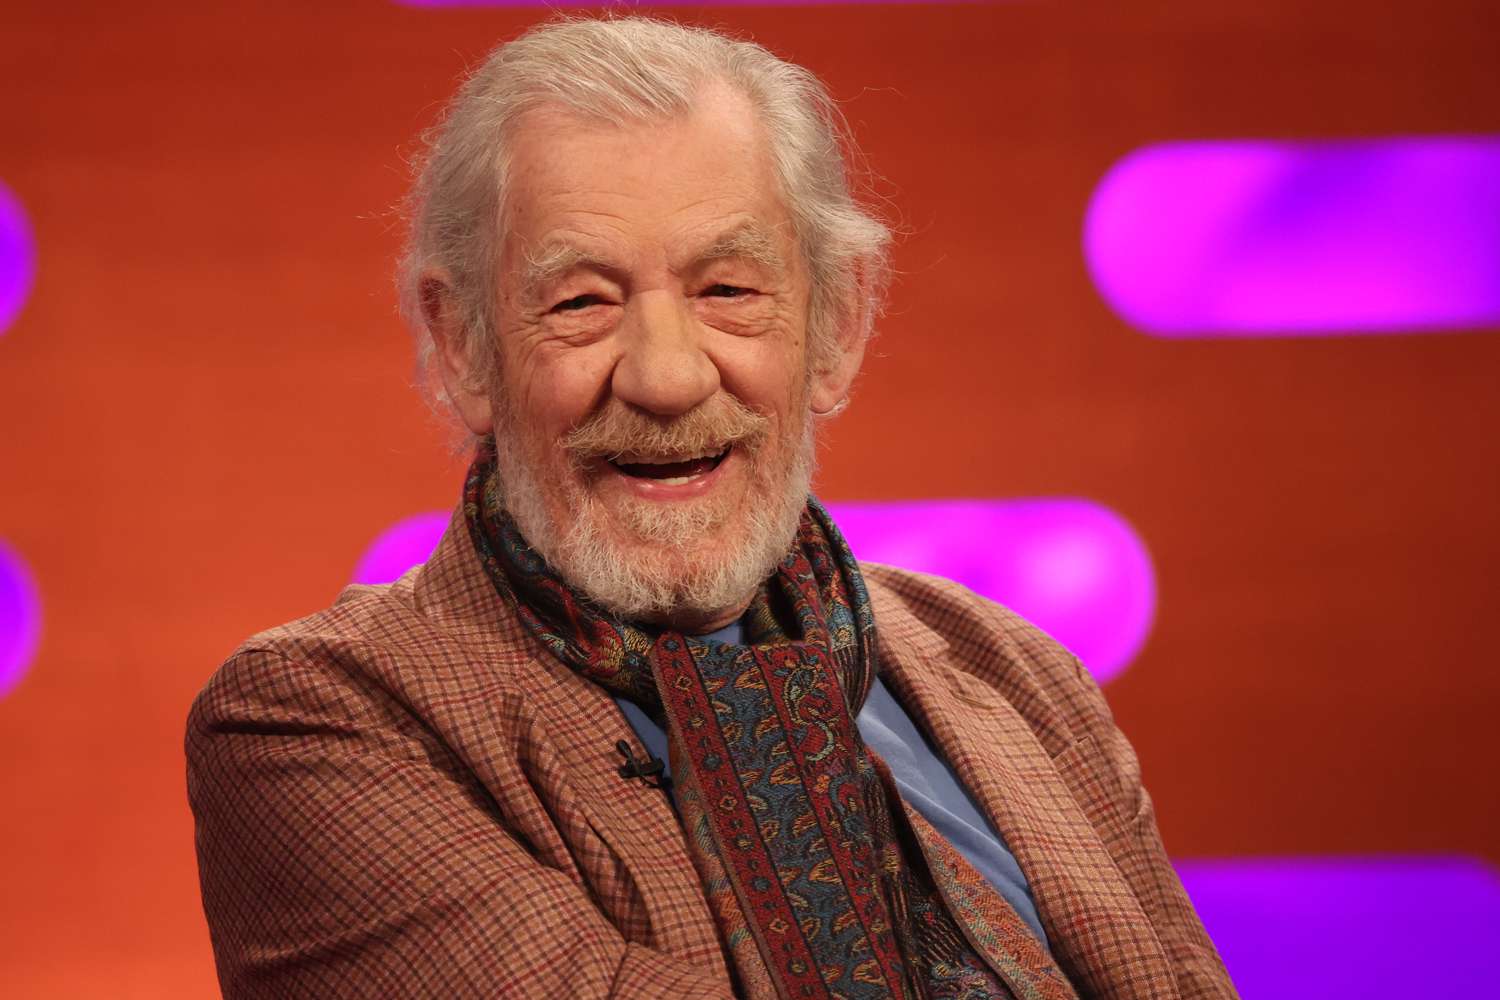 Sir Ian McKellen filming for the Graham Norton Show at BBC Studioworks 6 Television Centre, Wood Lane.